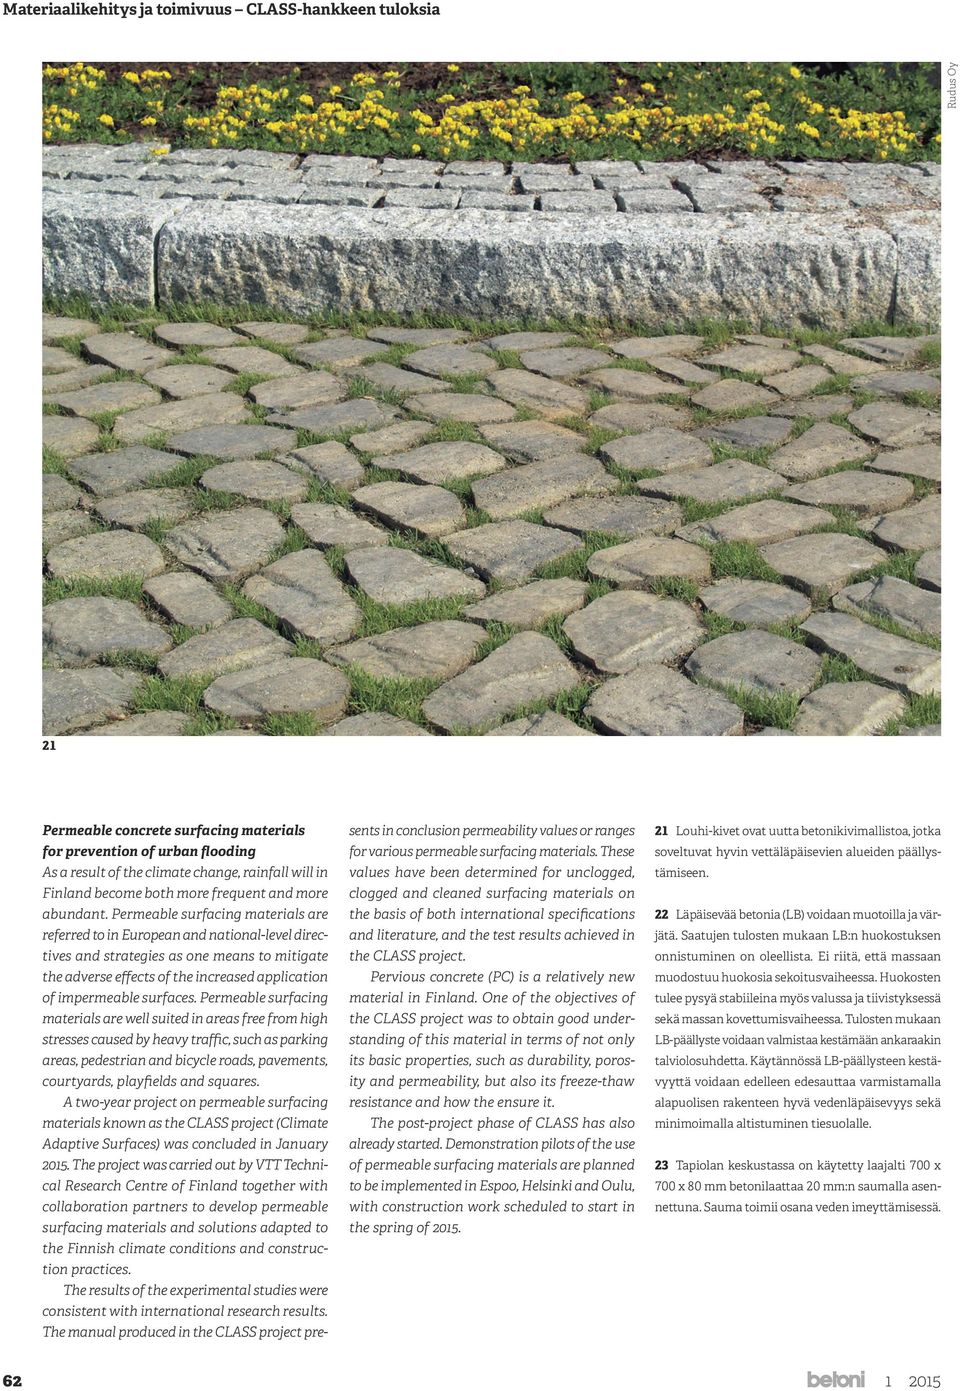 Permeable surfacing materials are referred to in European and national-level directives and strategies as one means to mitigate the adverse effects of the increased application of impermeable